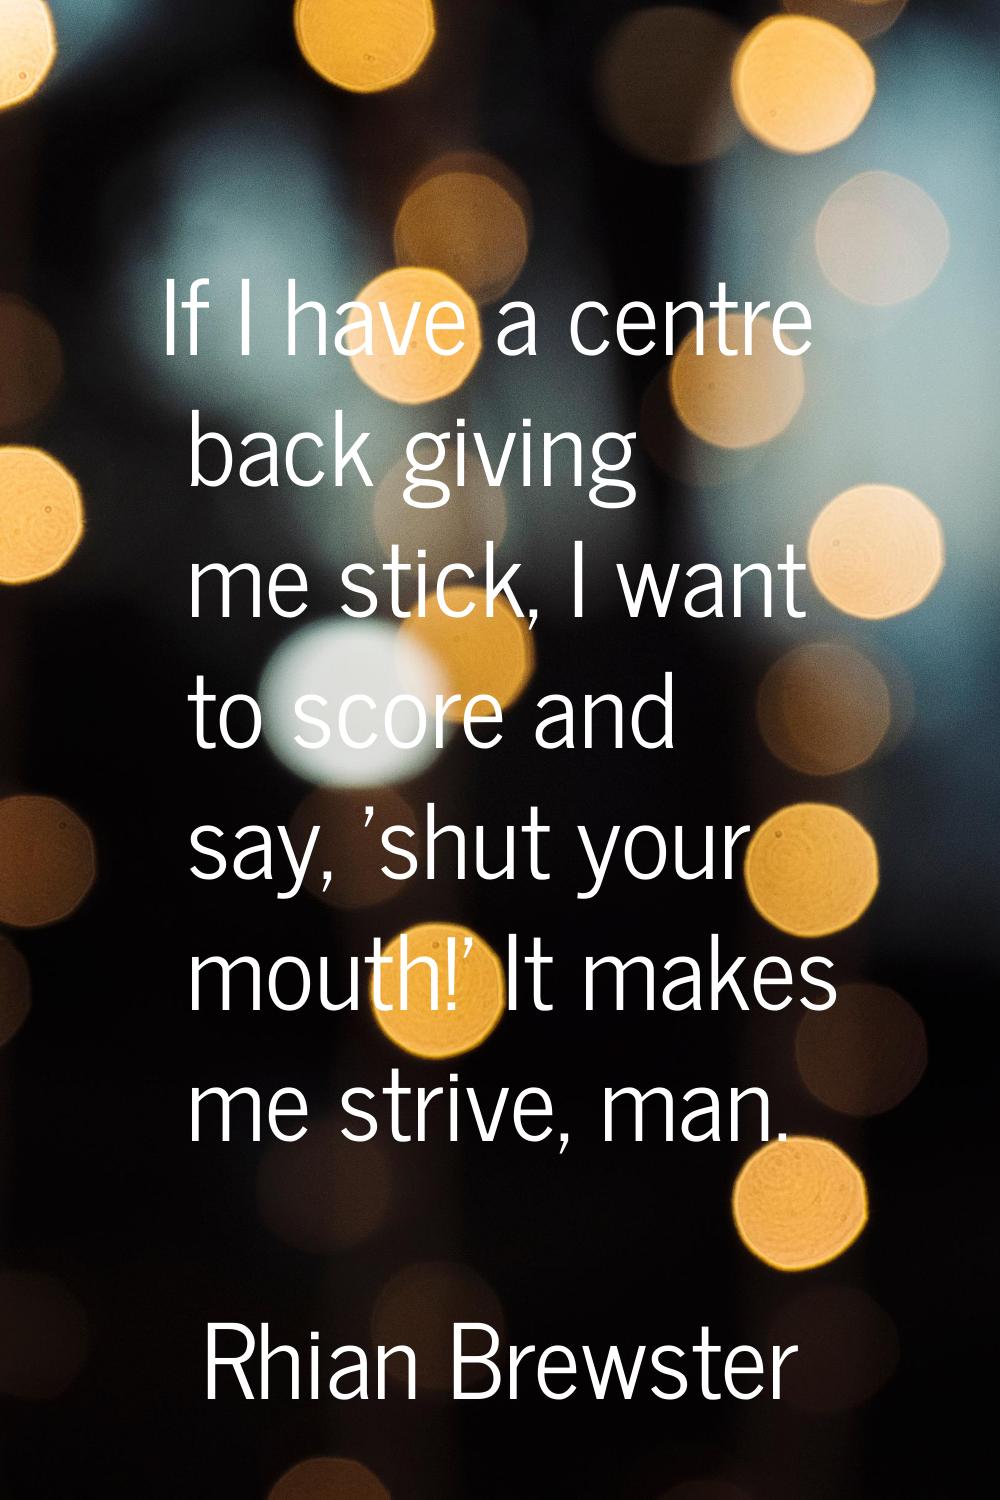 If I have a centre back giving me stick, I want to score and say, 'shut your mouth!' It makes me st